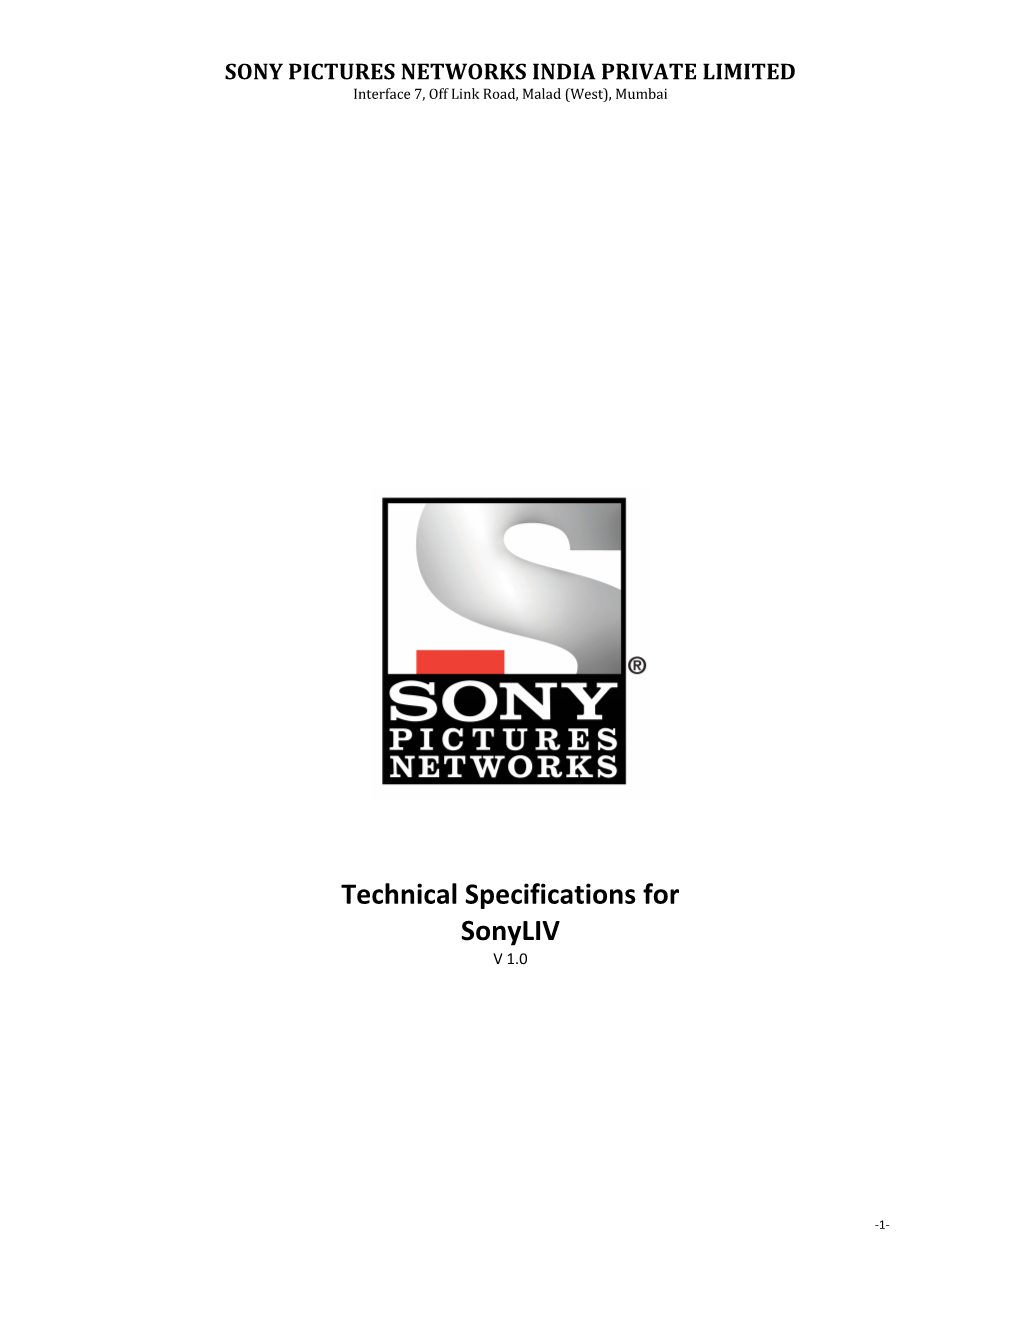 Technical Specifications for Sonyliv V 1.0